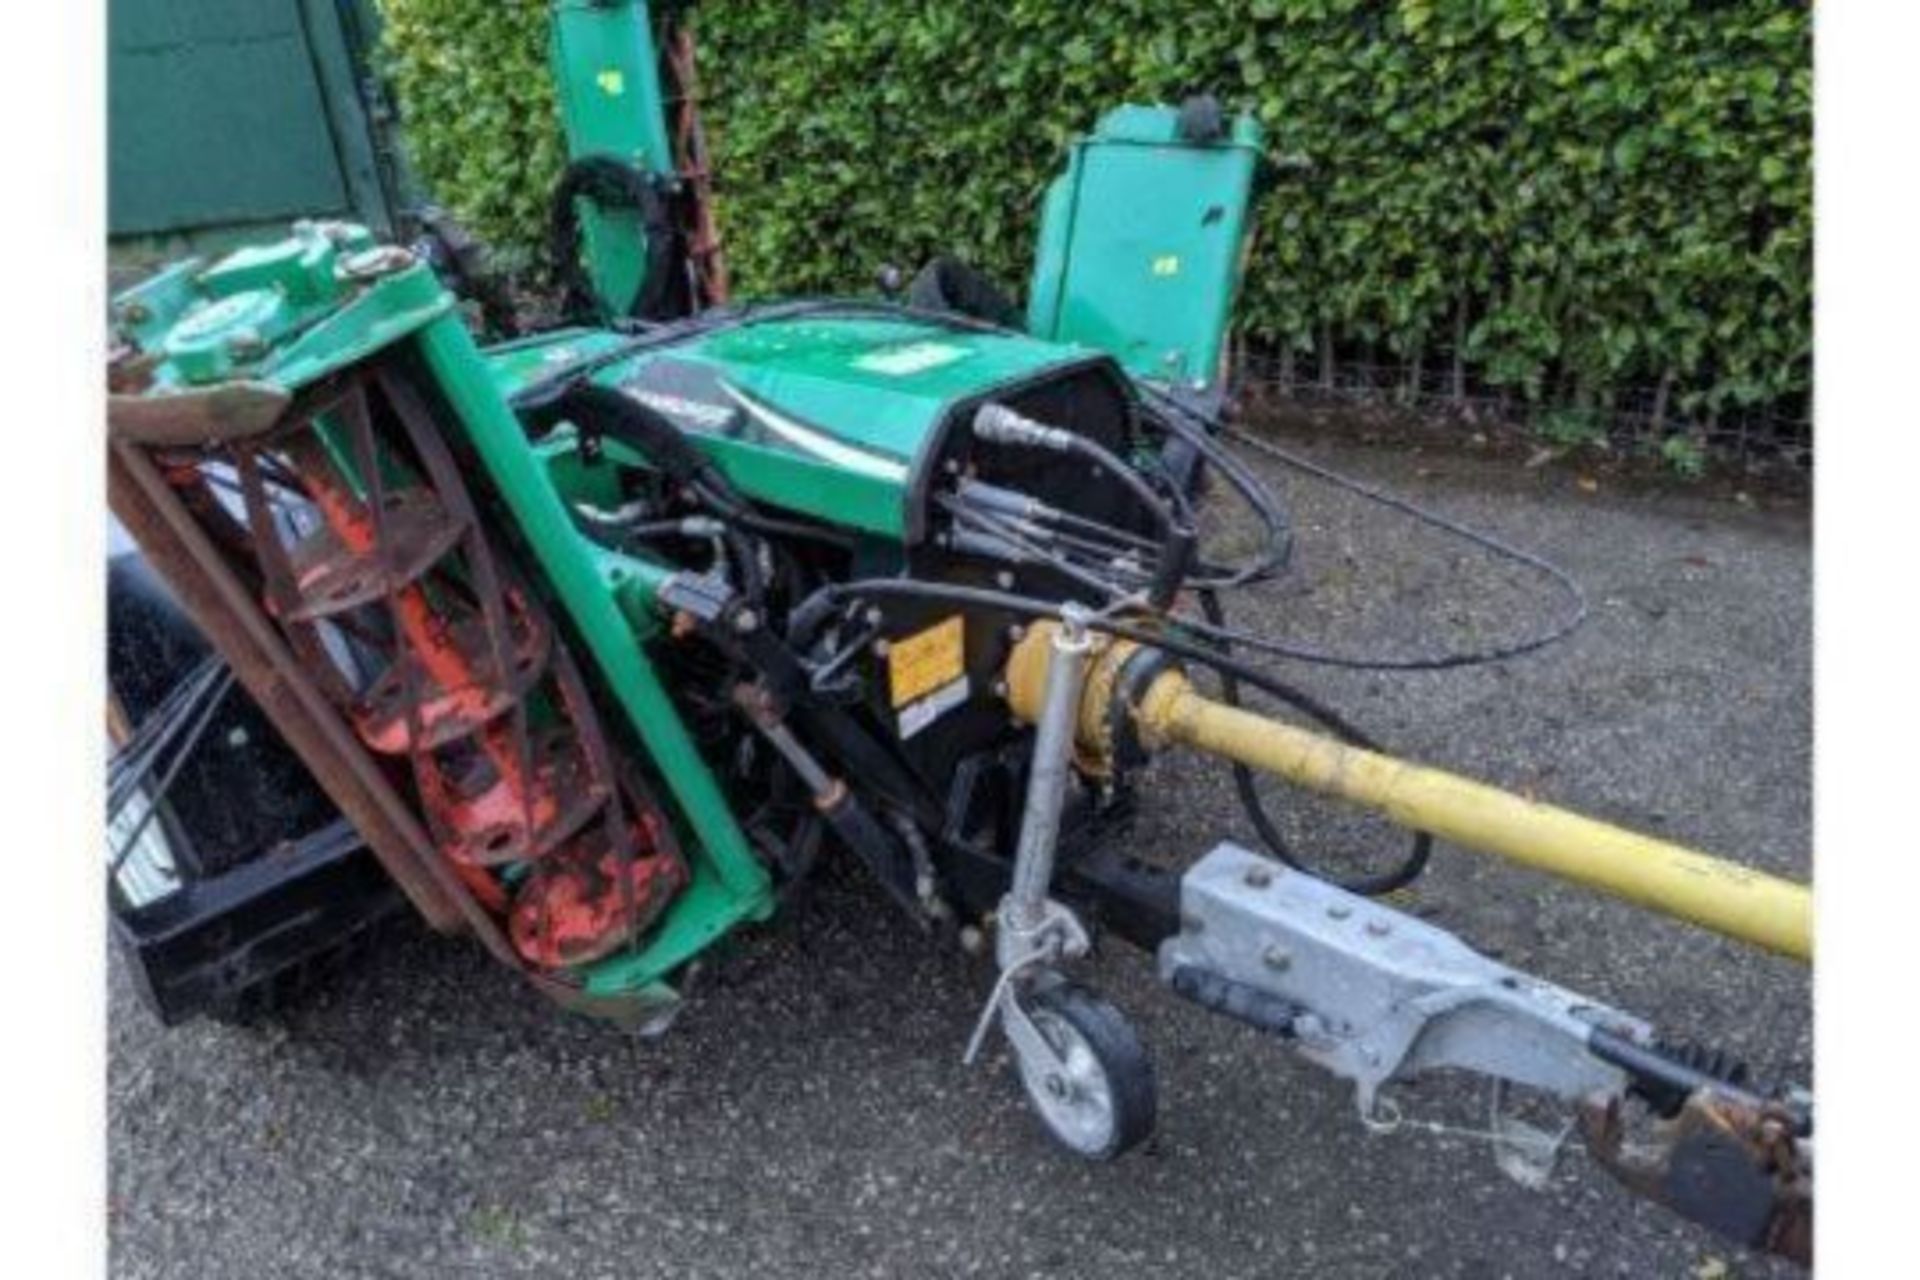 Ransomes TG3400 Tow Behind Gang Mower - Image 6 of 6